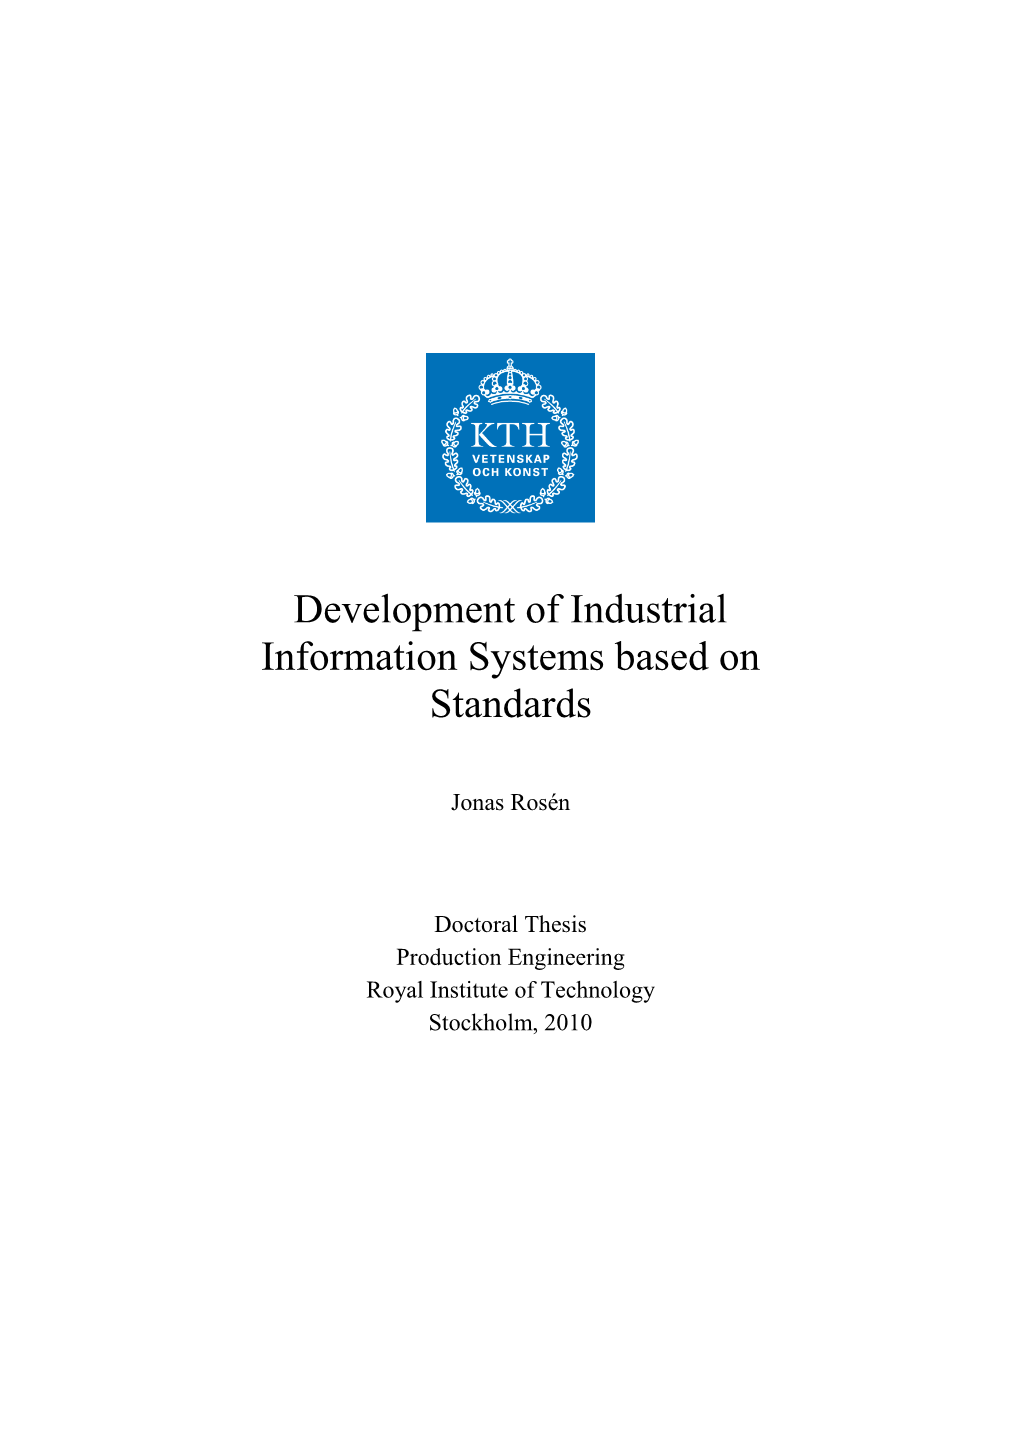 Development of Industrial Information Systems Based on Standards